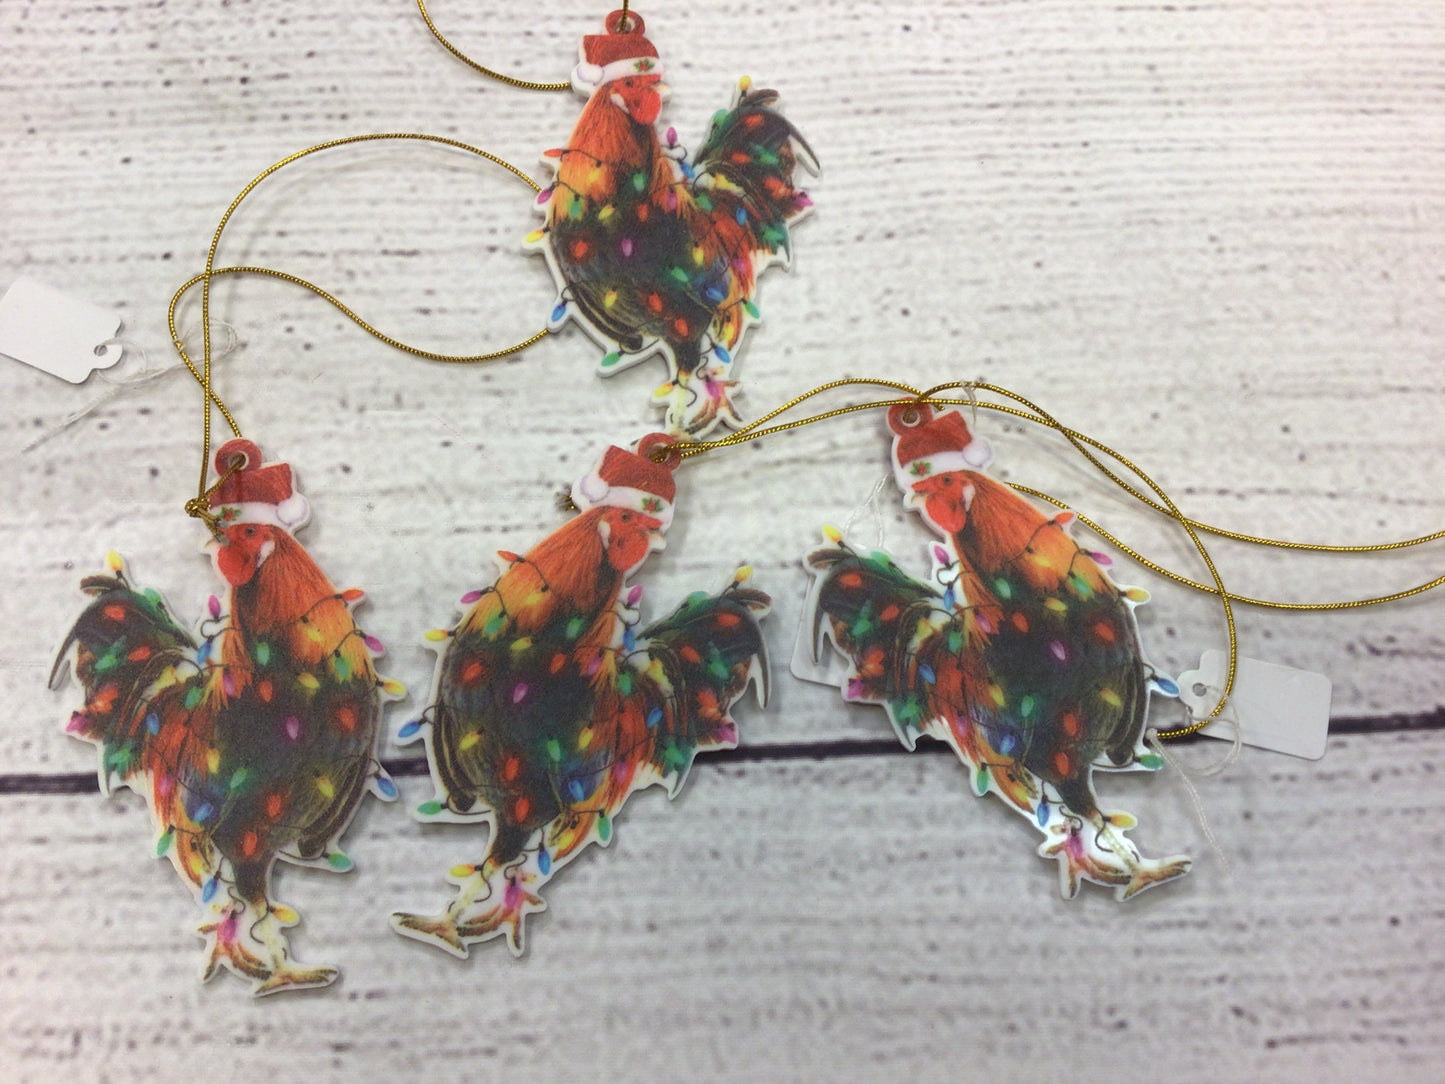 Rooster in a Santa hat ornament